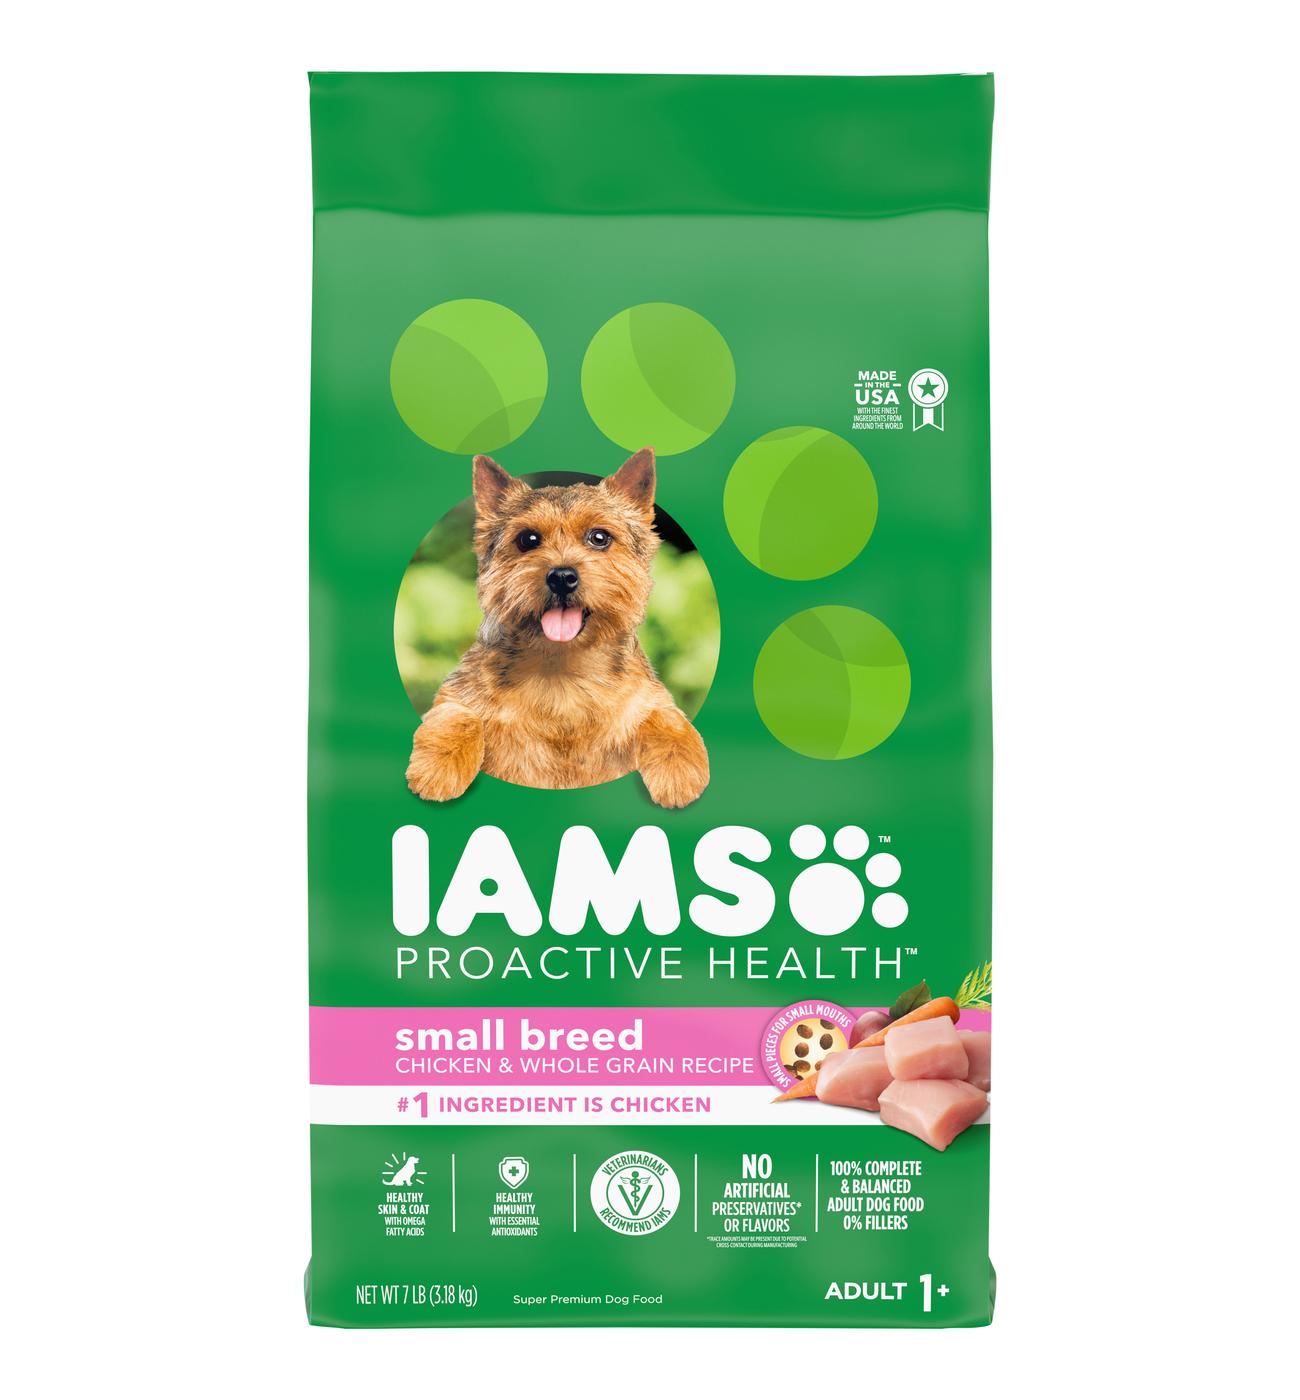 IAMS Proactive Health Small Breed Chicken Recipe Adult Dry Dog Food; image 1 of 5